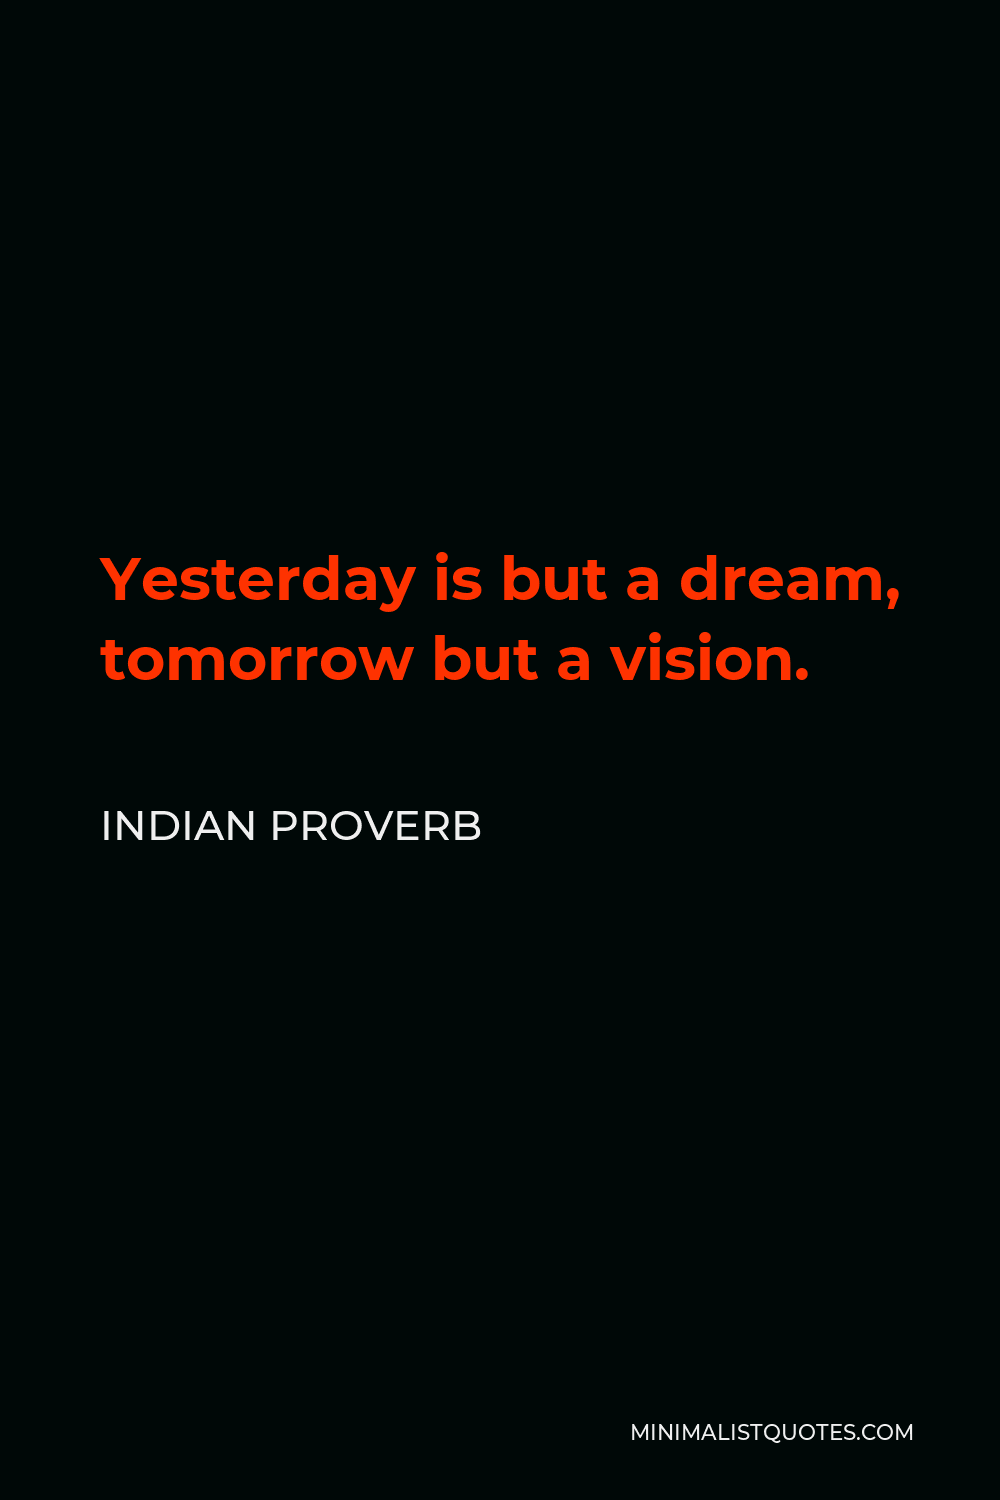 Indian Proverb Quote - Yesterday is but a dream, tomorrow but a vision.